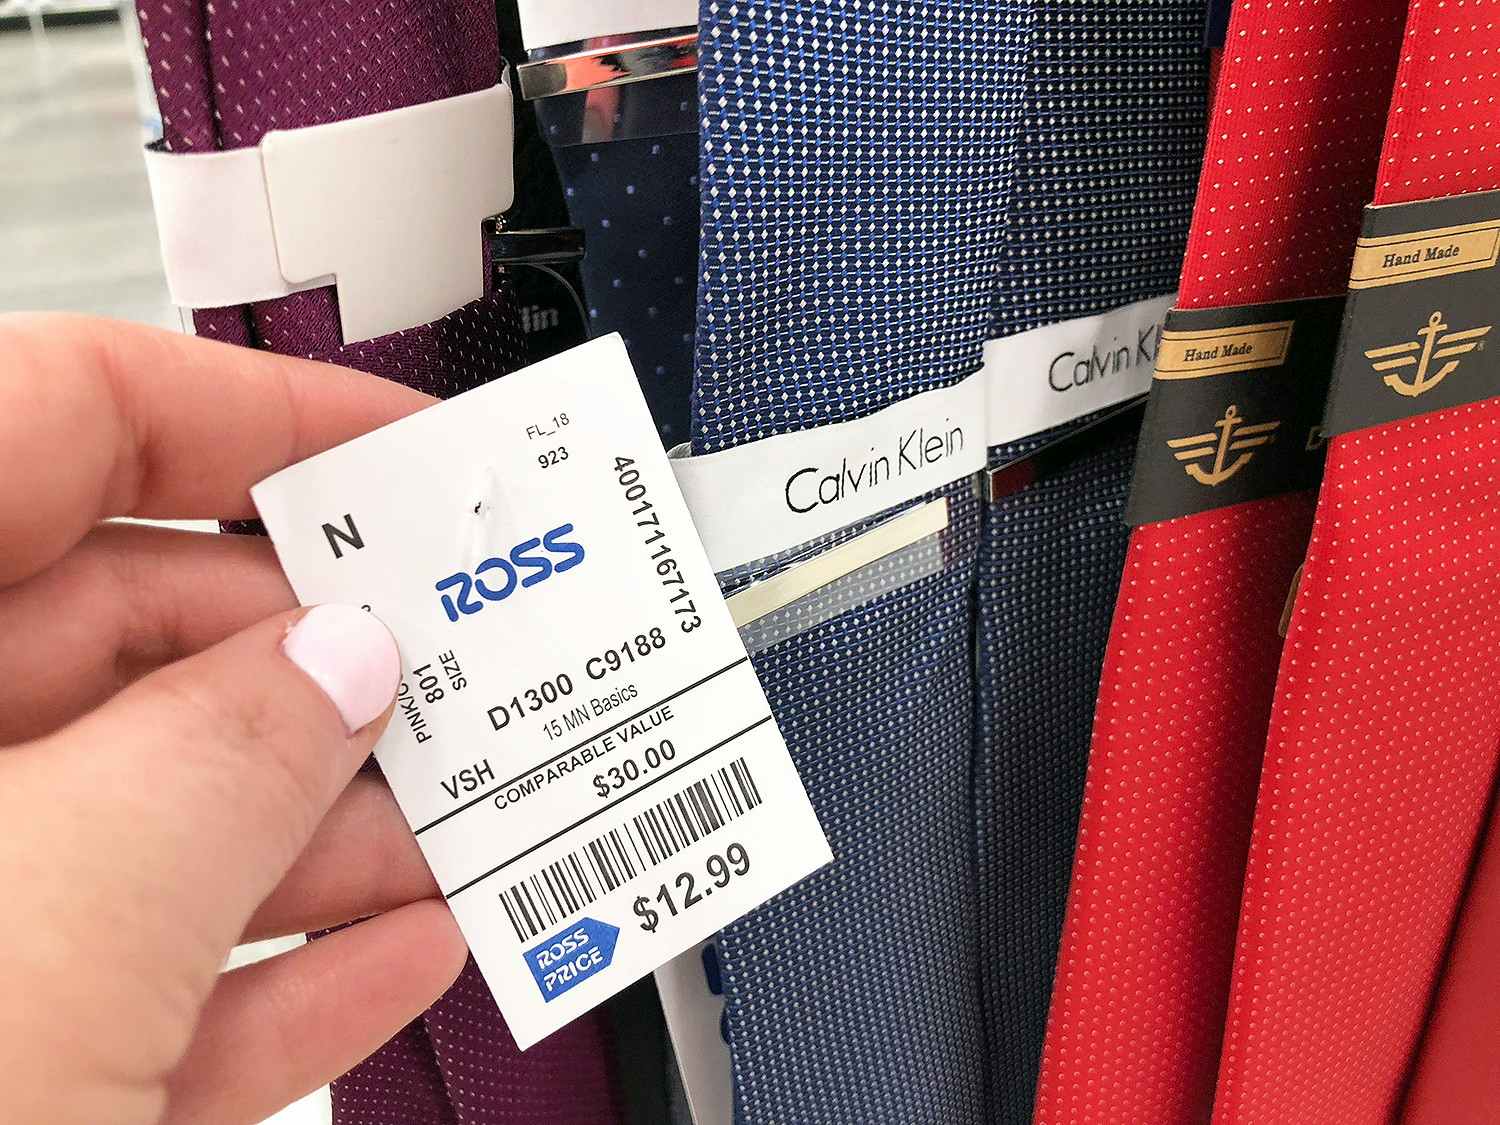 Calvin Klein ties at Ross for $7 under Nordstrom Rack or Amazon retail price.